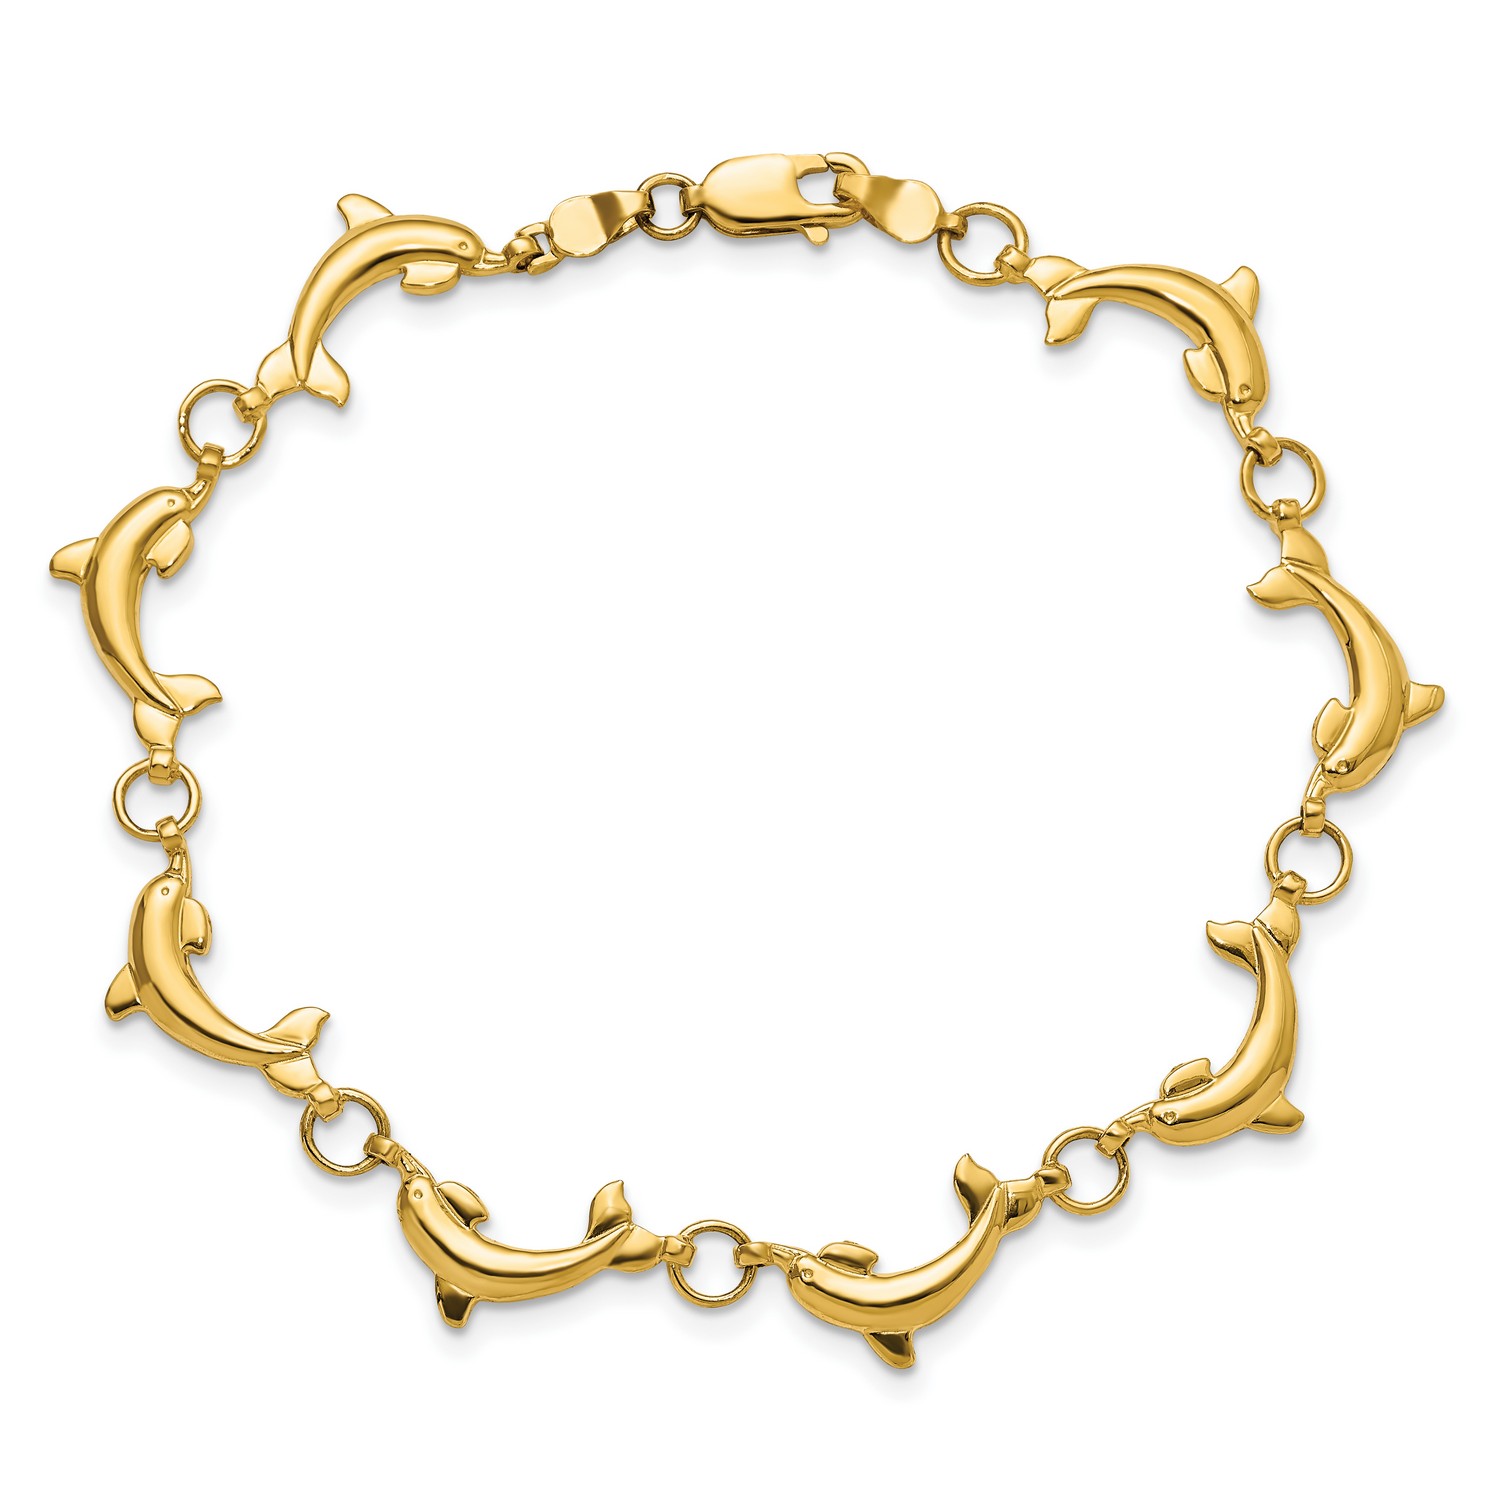 Polished Dolphin Bracelet In Real 14k Yellow Gold 7.5 in mm x 6 mm 4